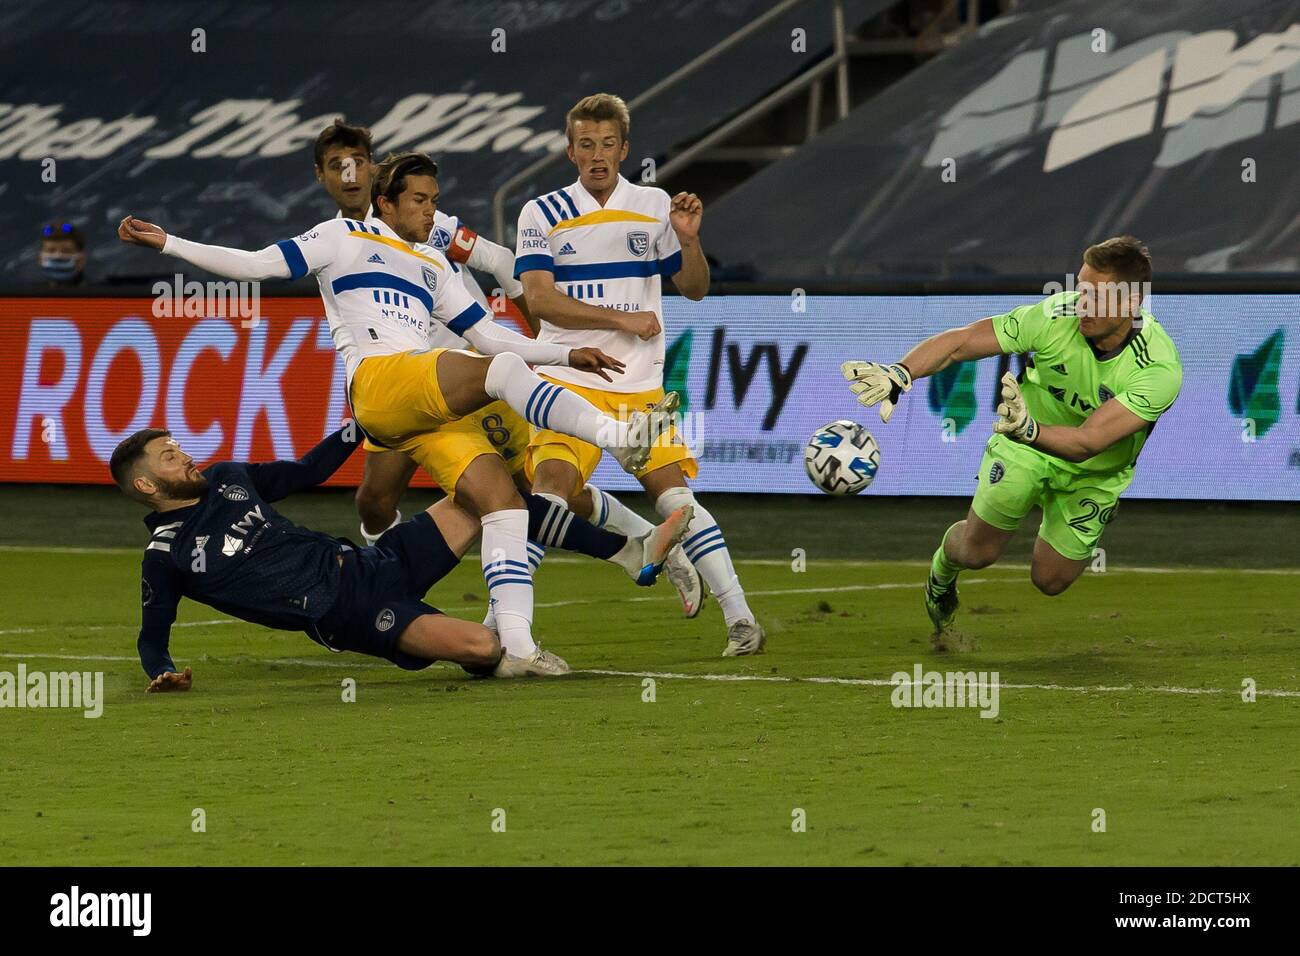 Kansas City, Kansas, USA. 21st Nov, 2020. At forefront (r-l), Sporting KC goalkeeper Tim Melia #29 dives against the offense of San Jose Earthquakes forward Cade Cowell #44 during playoff overtime. Behind (l-r) are Sporting KC midfielder Ilie Sanchez #6, San Jose Earthquakes forward Chris Wondolowski #8 and San Jose Earthquakes midfielder Jackson Yueill #14. Credit: Serena S.Y. Hsu/ZUMA Wire/Alamy Live News Stock Photo